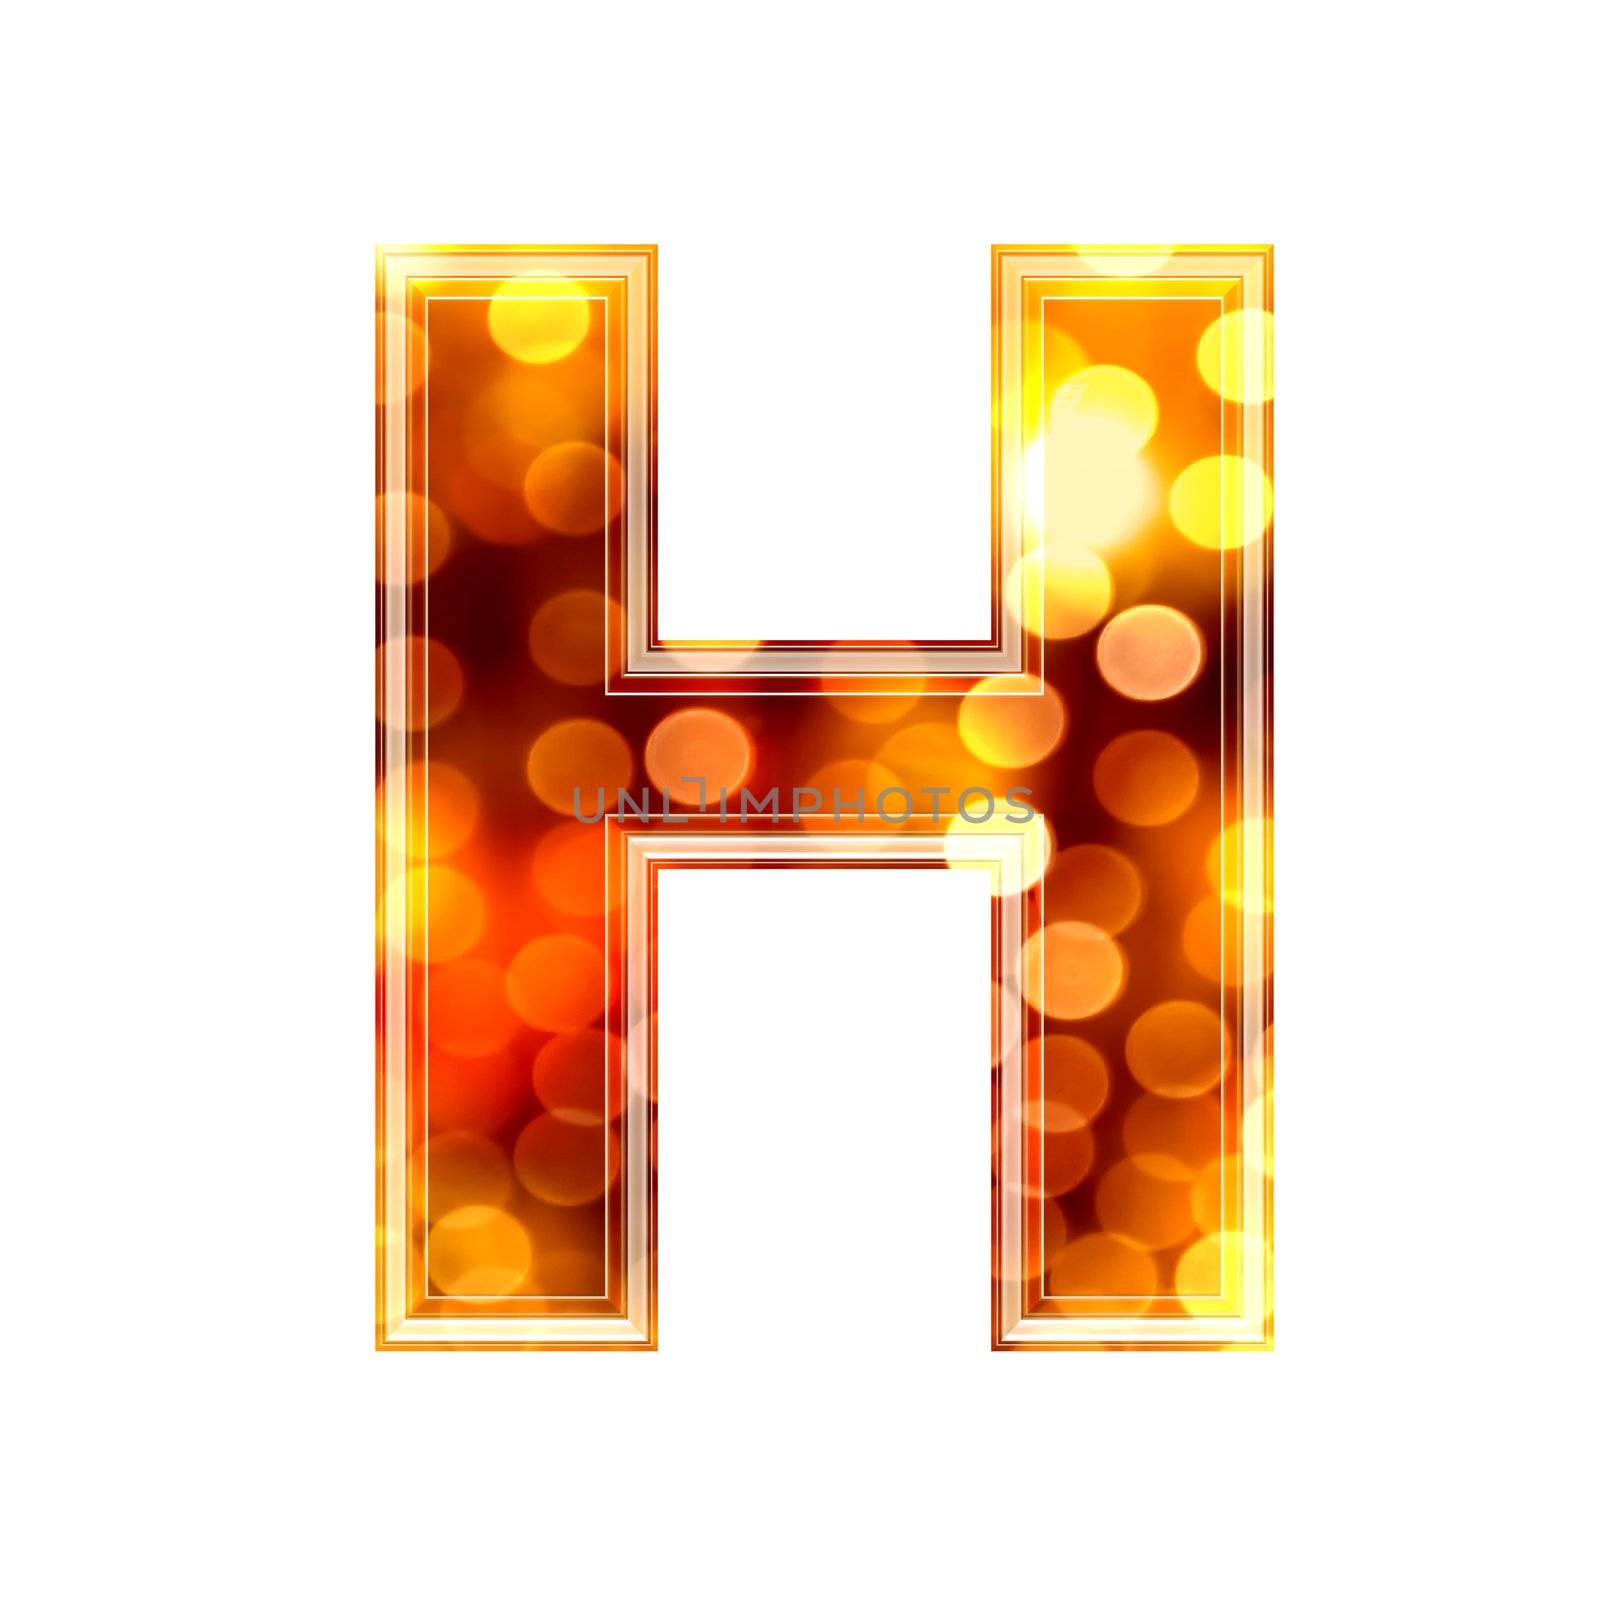 3d letter with glowing lights texture - H by chrisroll